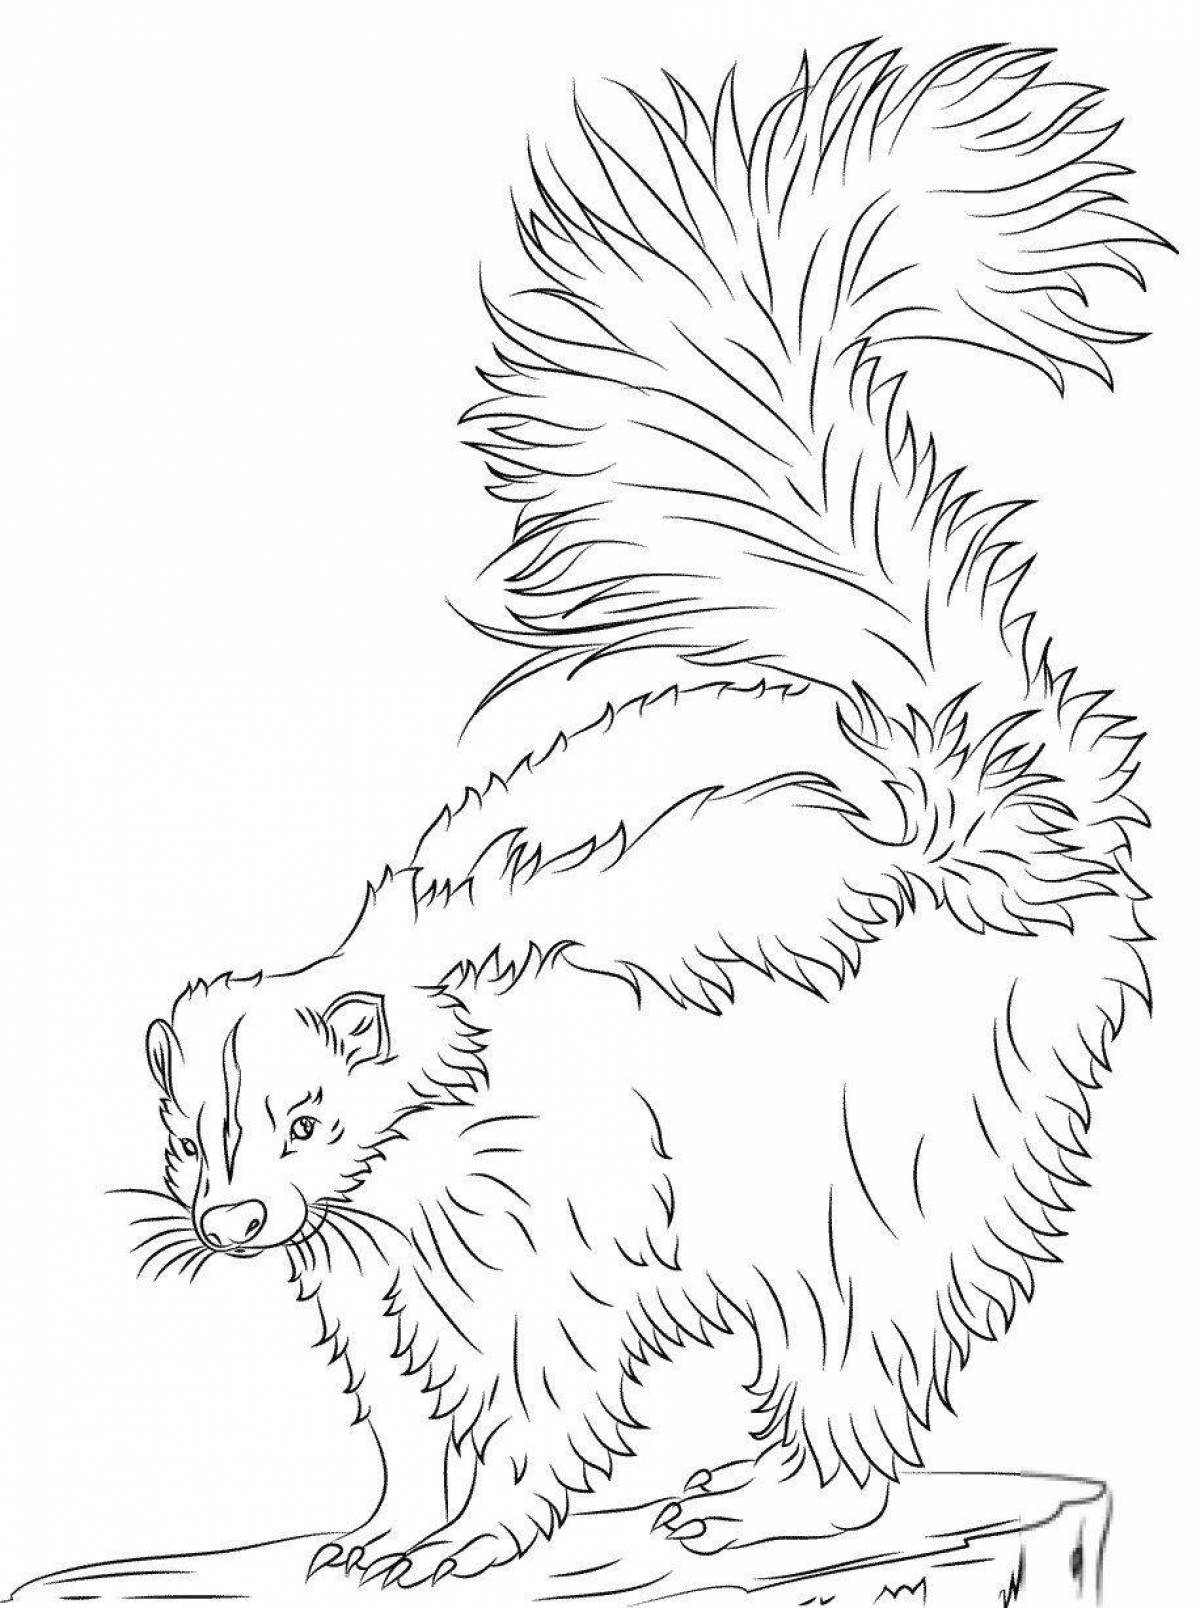 Playful wolverine animal coloring page for kids